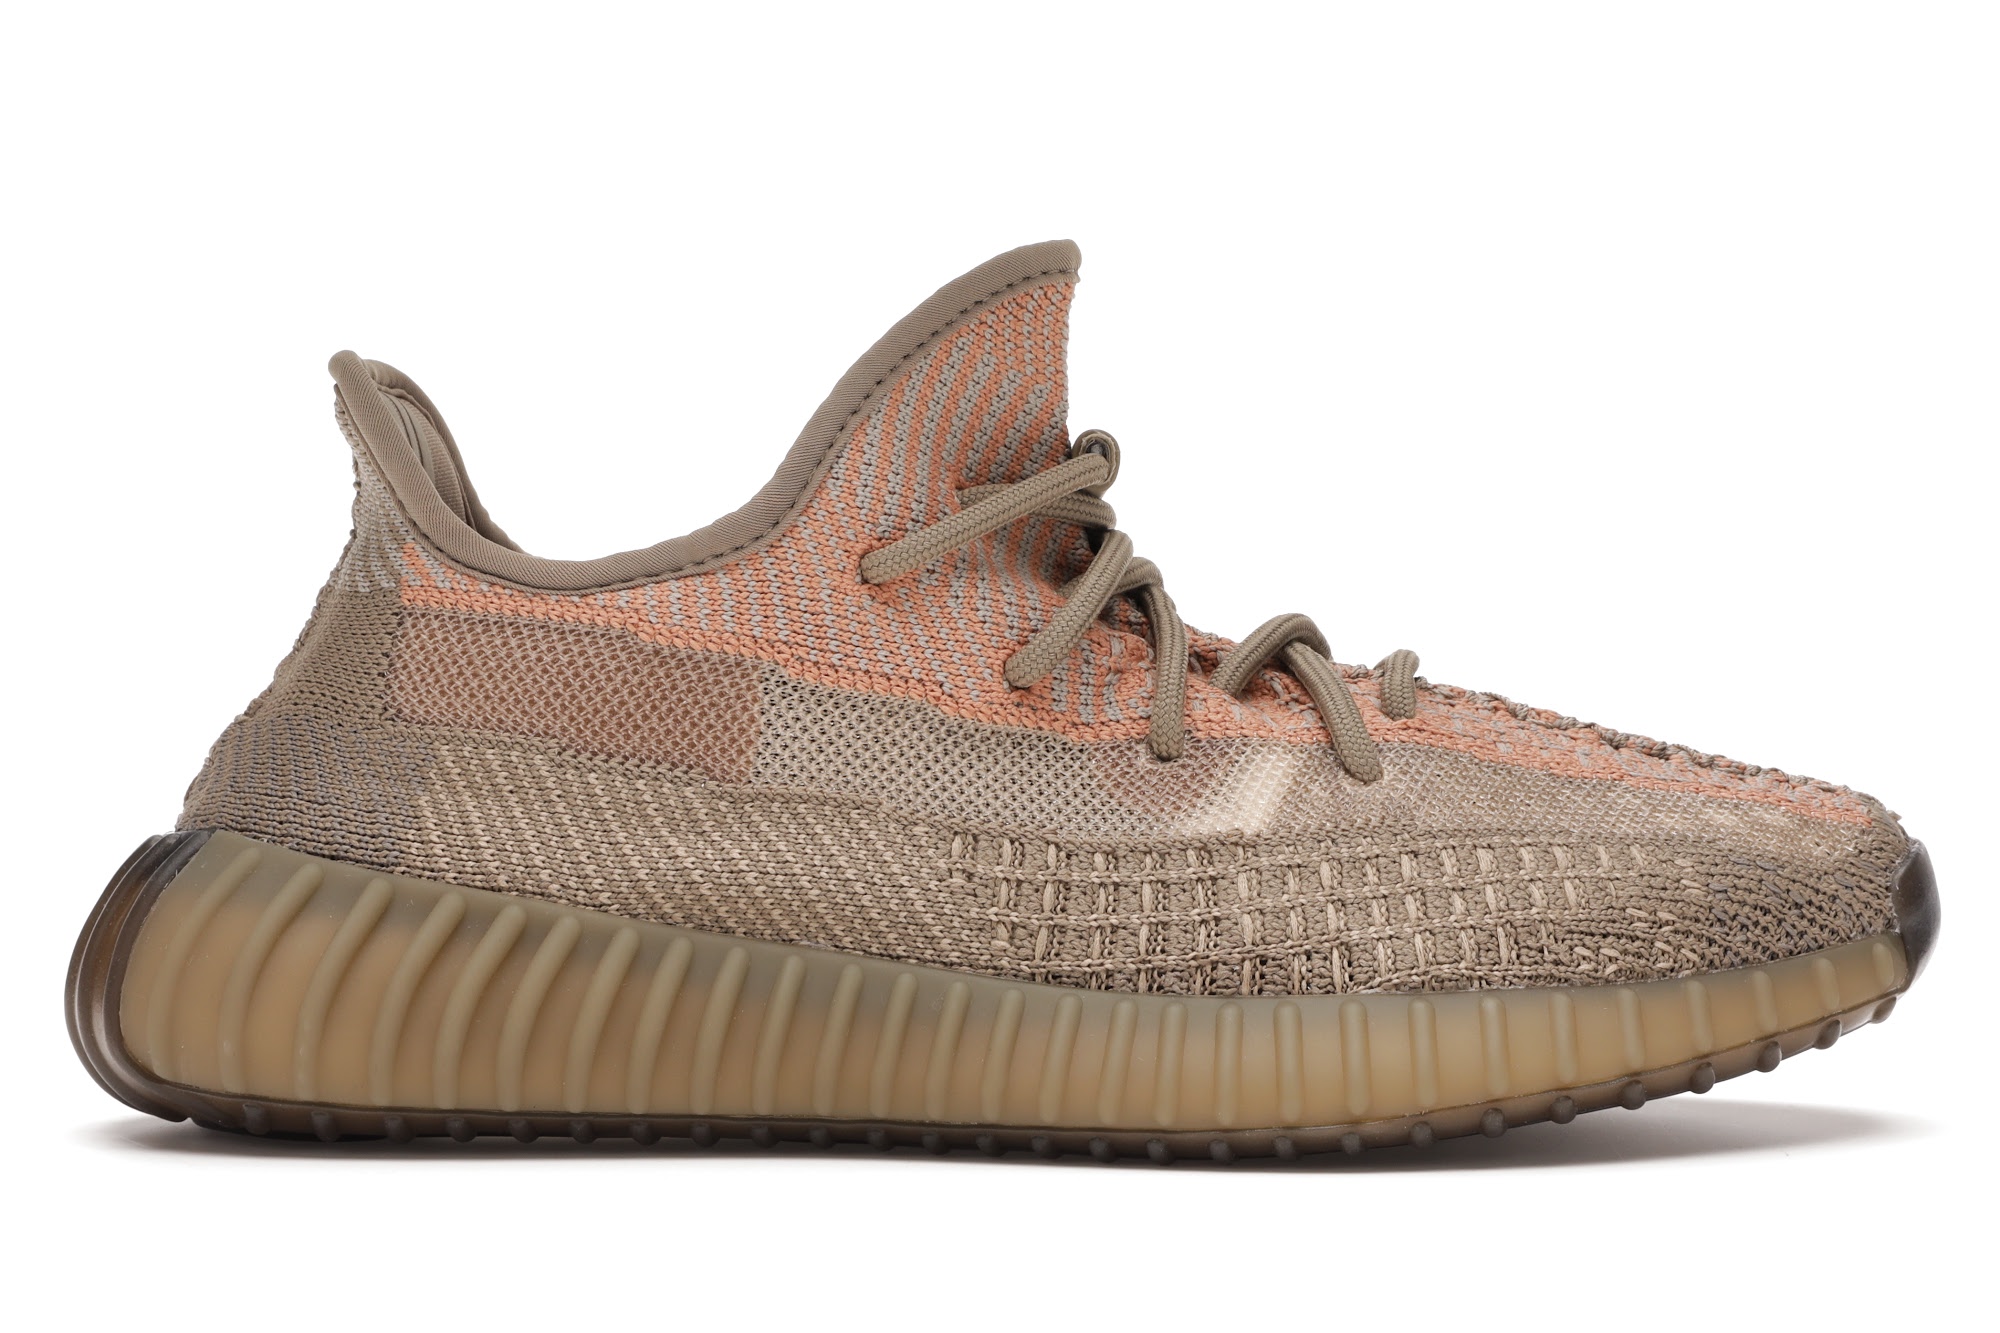 adidas Yeezy Boost 350 V2 Sand Taupe Men's - FZ5240 - US